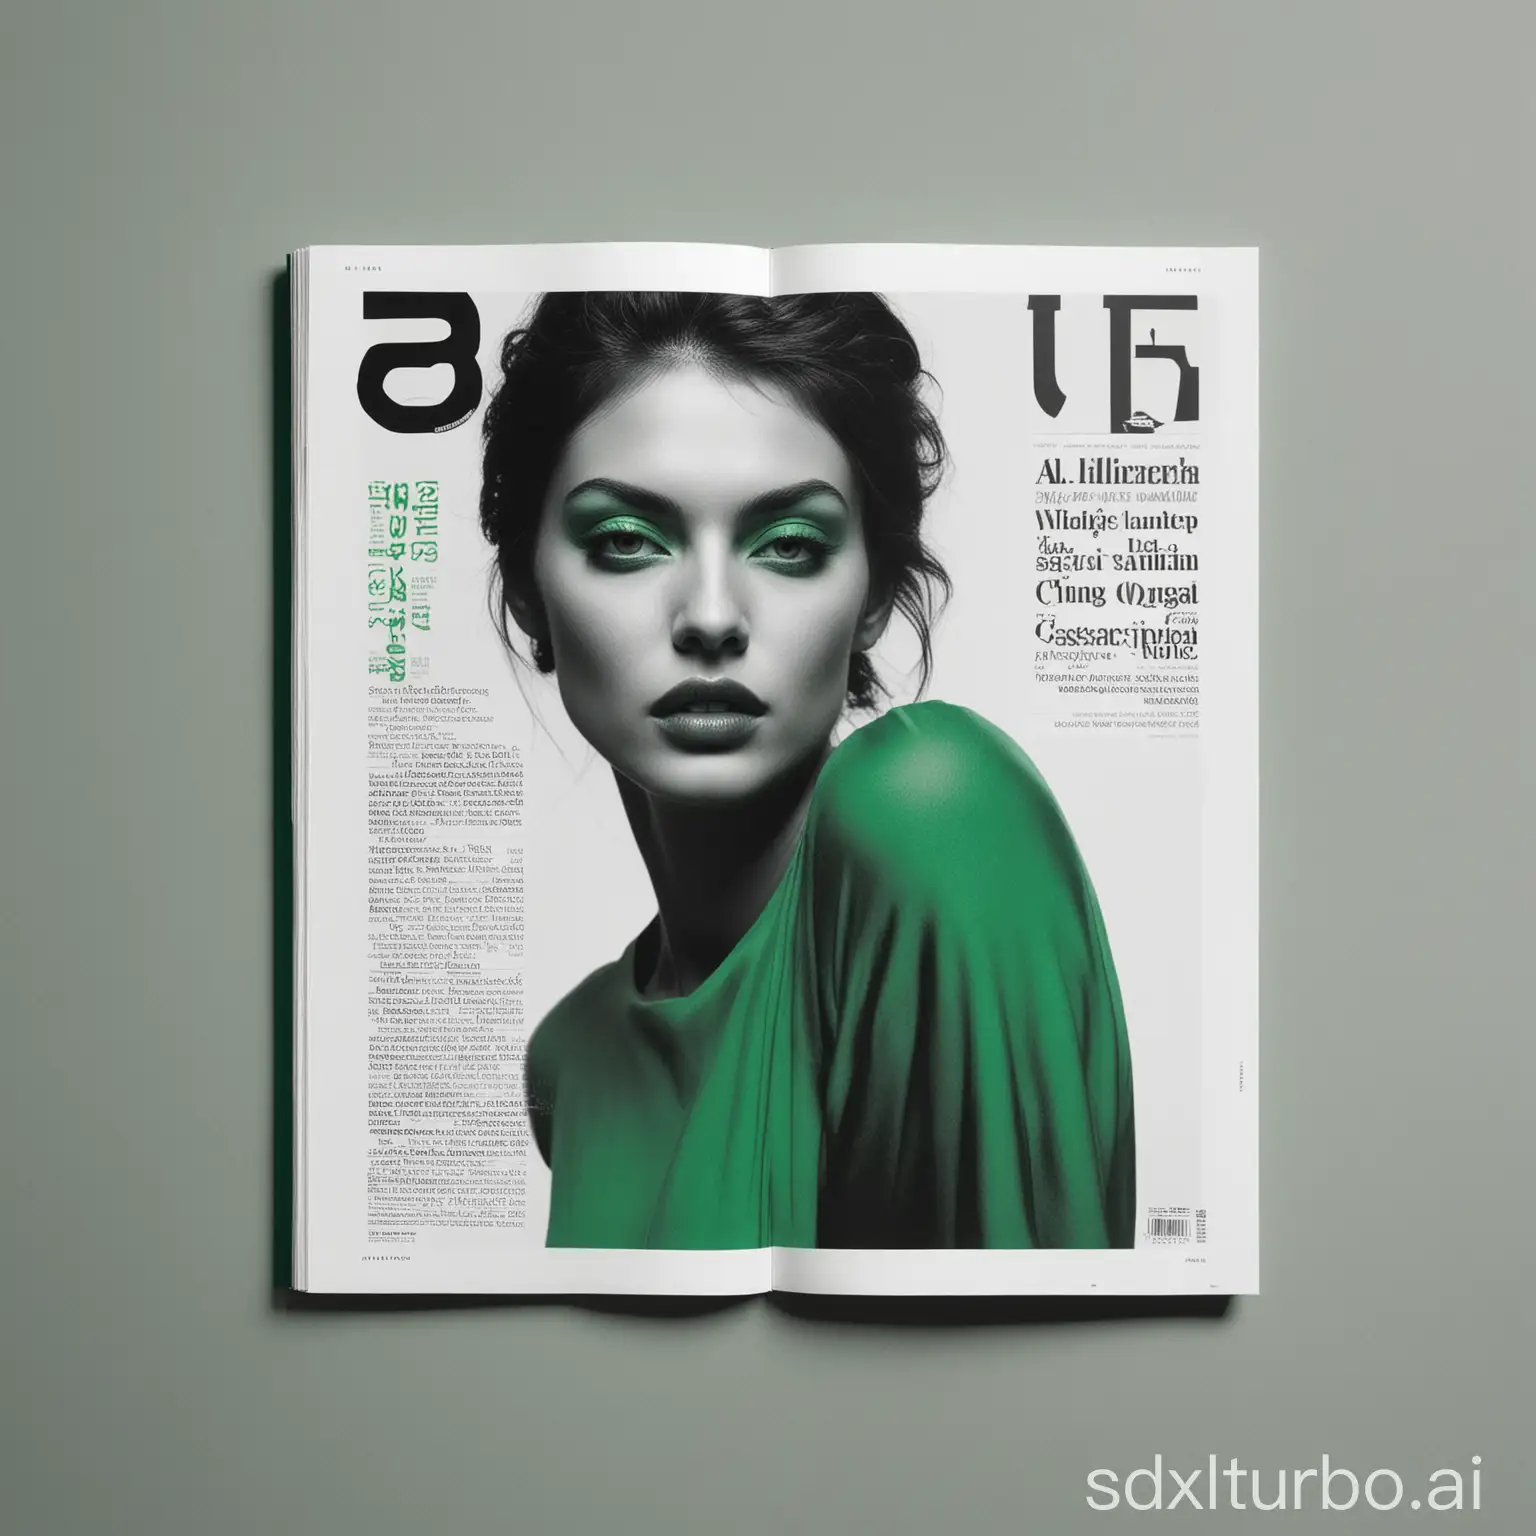 printed layout of contemporary art magazine. Ultra-modern design, bold typographics, large bright-green headers, unconventional use of high-fashion photogrpagraphy --v 6